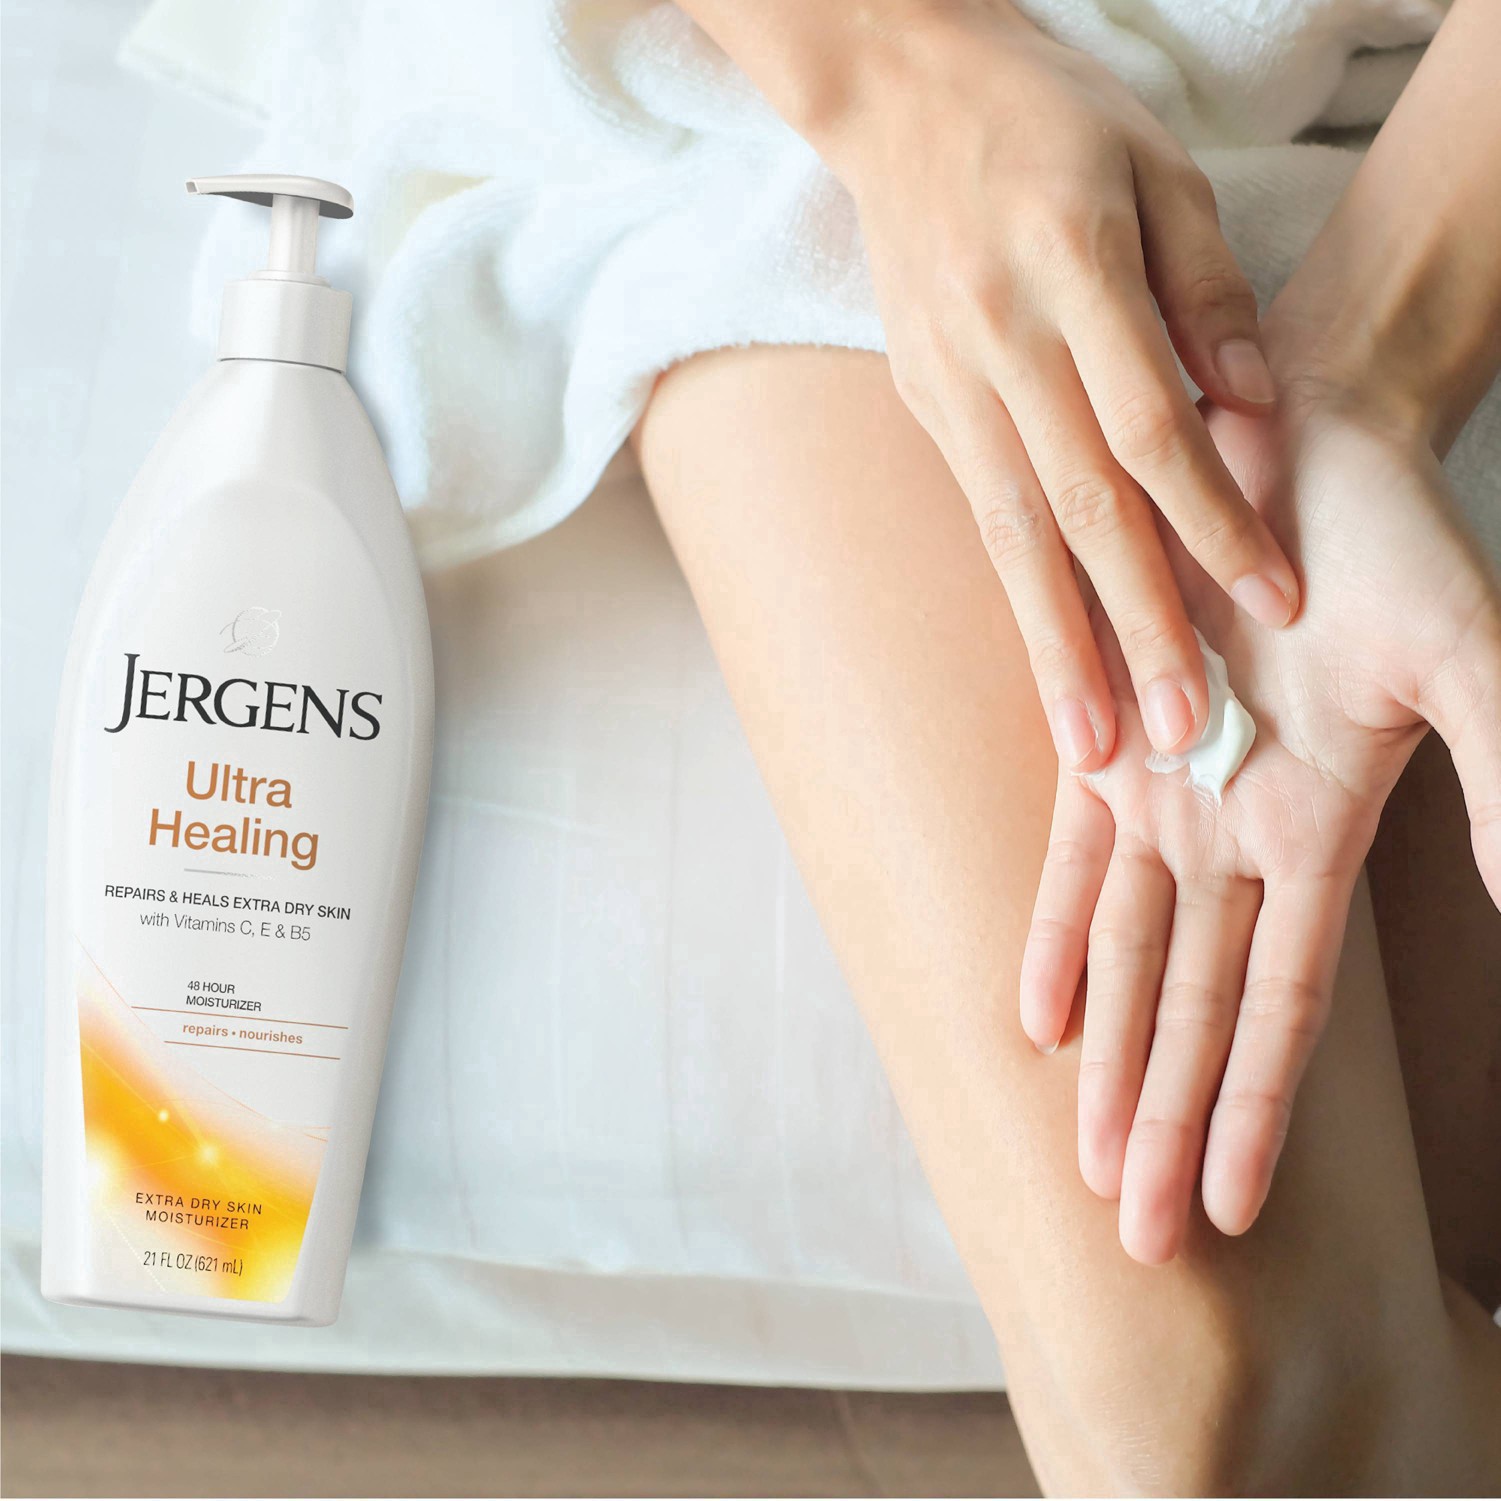 slide 63 of 67, Jergens Hand and Body Lotion, Dry Skin Moisturizer with Vitamins C,E, and B5, 21 fl oz